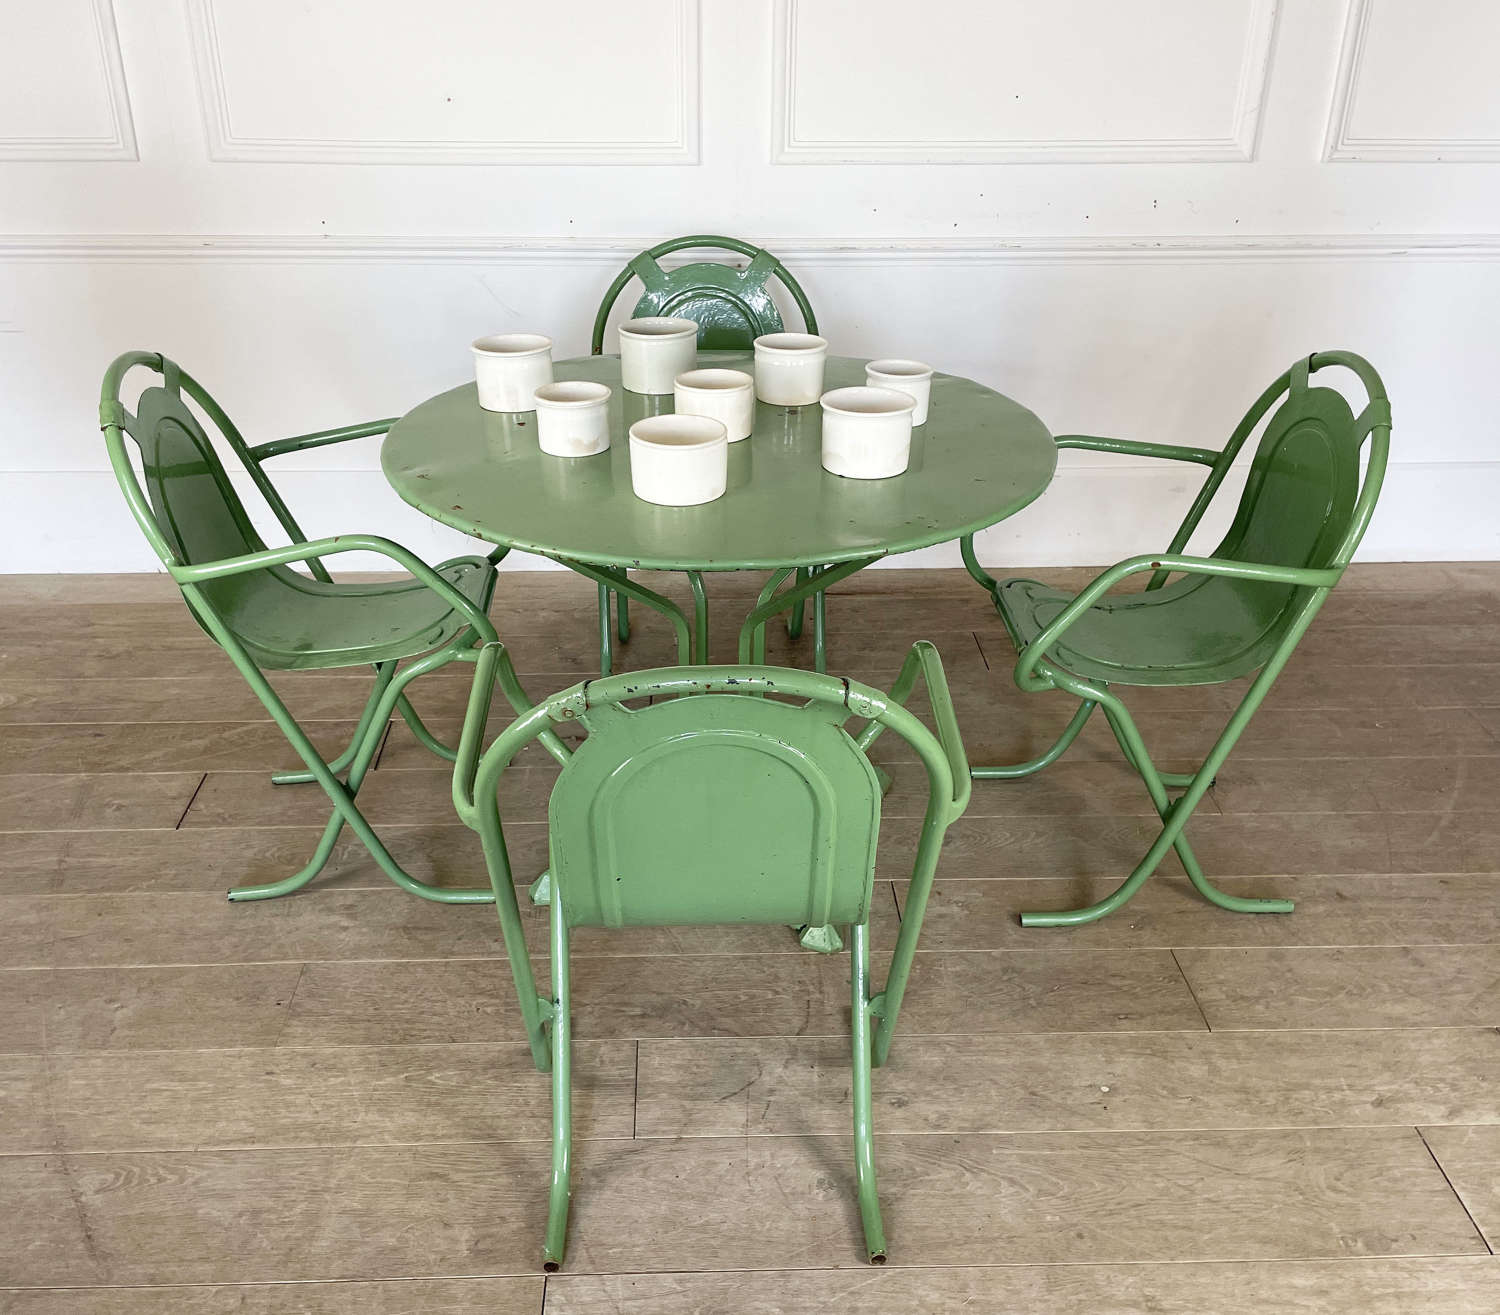 French Iron Garden Table and Chairs circa 1940